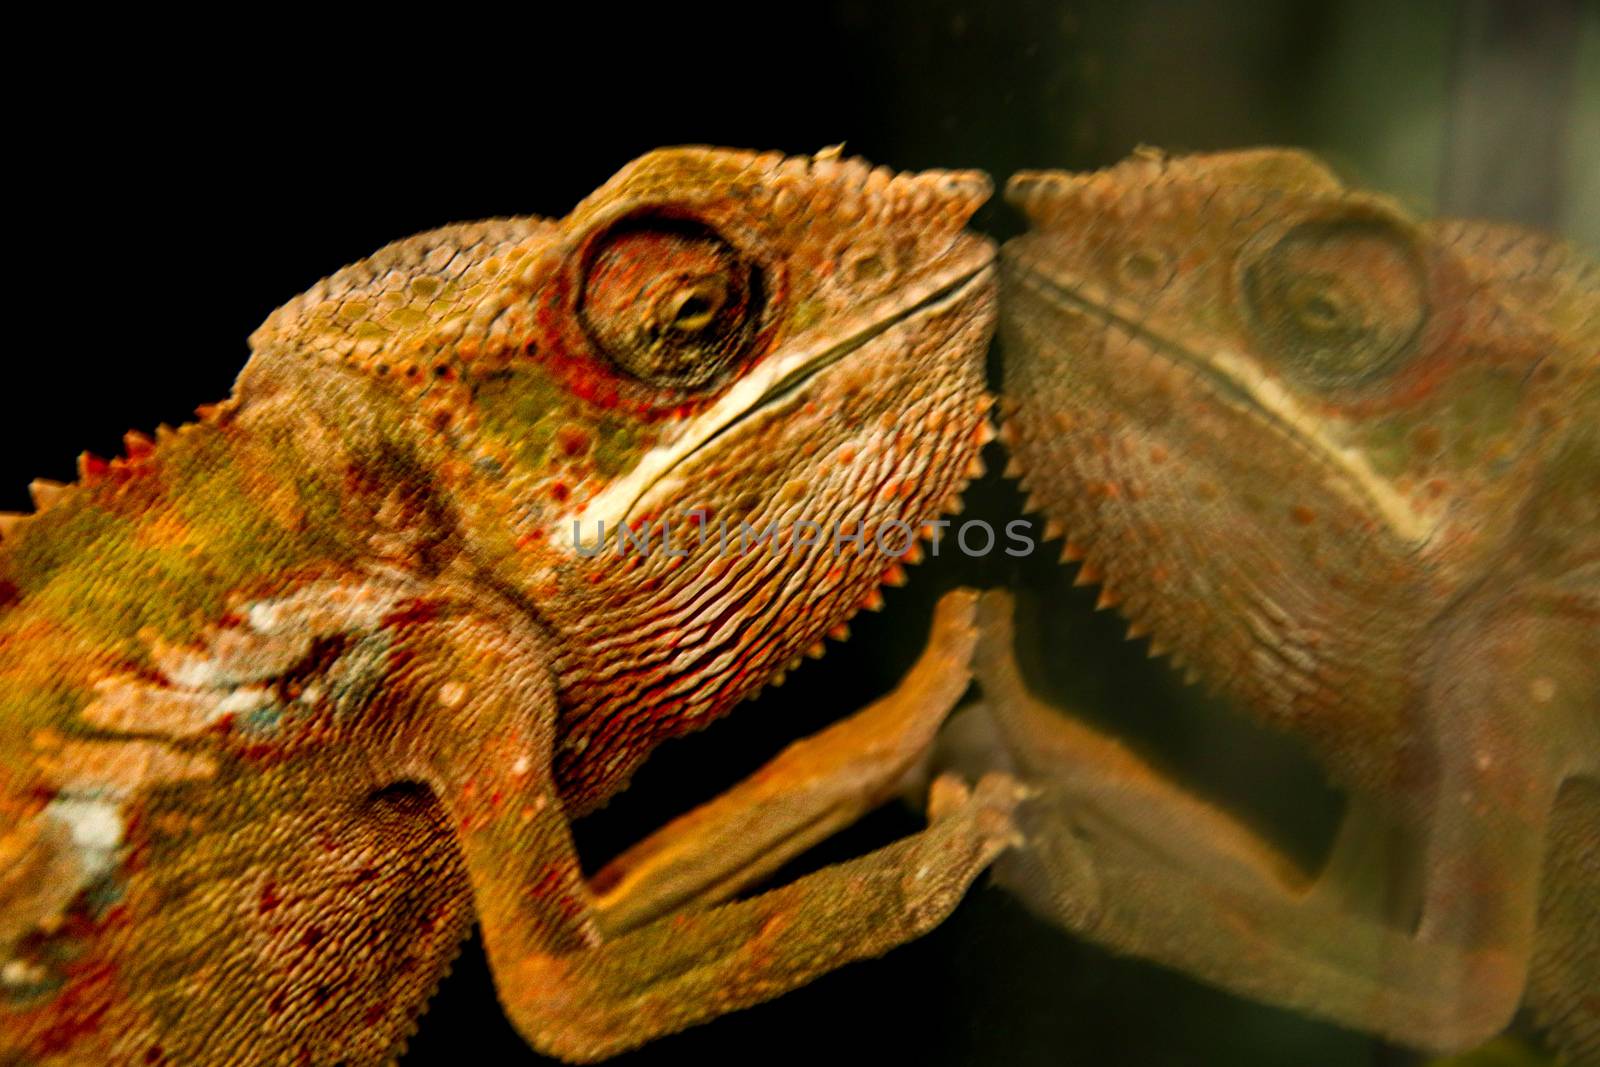 Blur on purpose for background use, a Panther chameleon (Furcifer pardalis) reflected on a glass surface to show concept of duality, abstraction and illusion